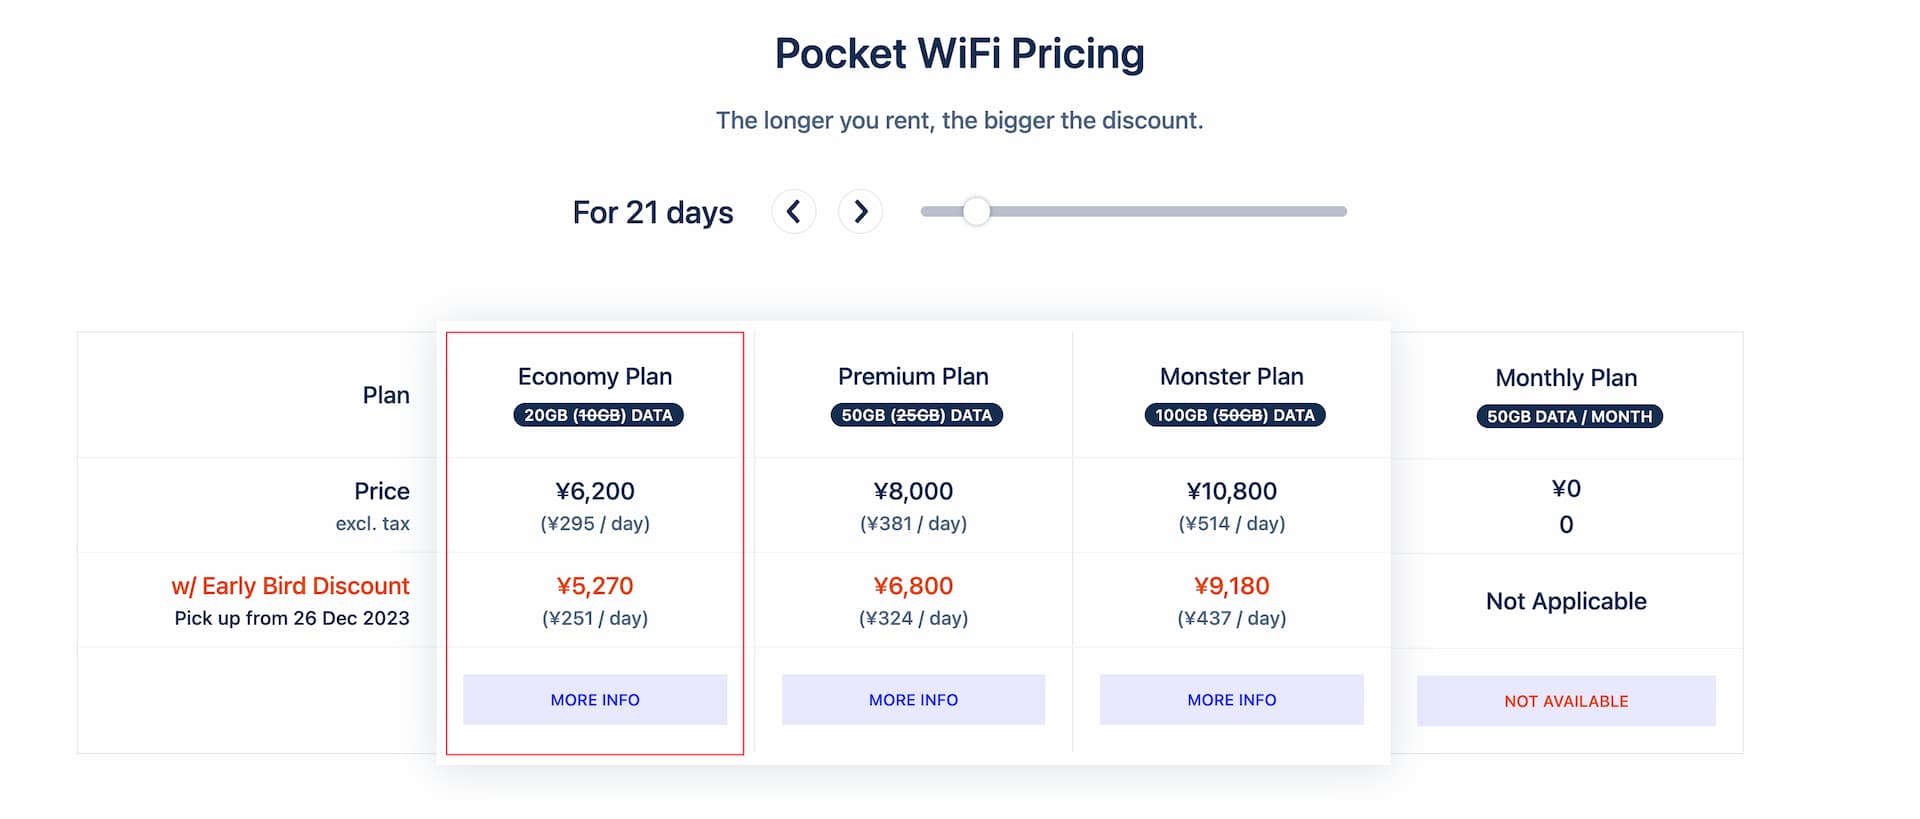 Looking for Cheap Pocket WiFi Rental in Japan? Check This 20GB Economy Plan